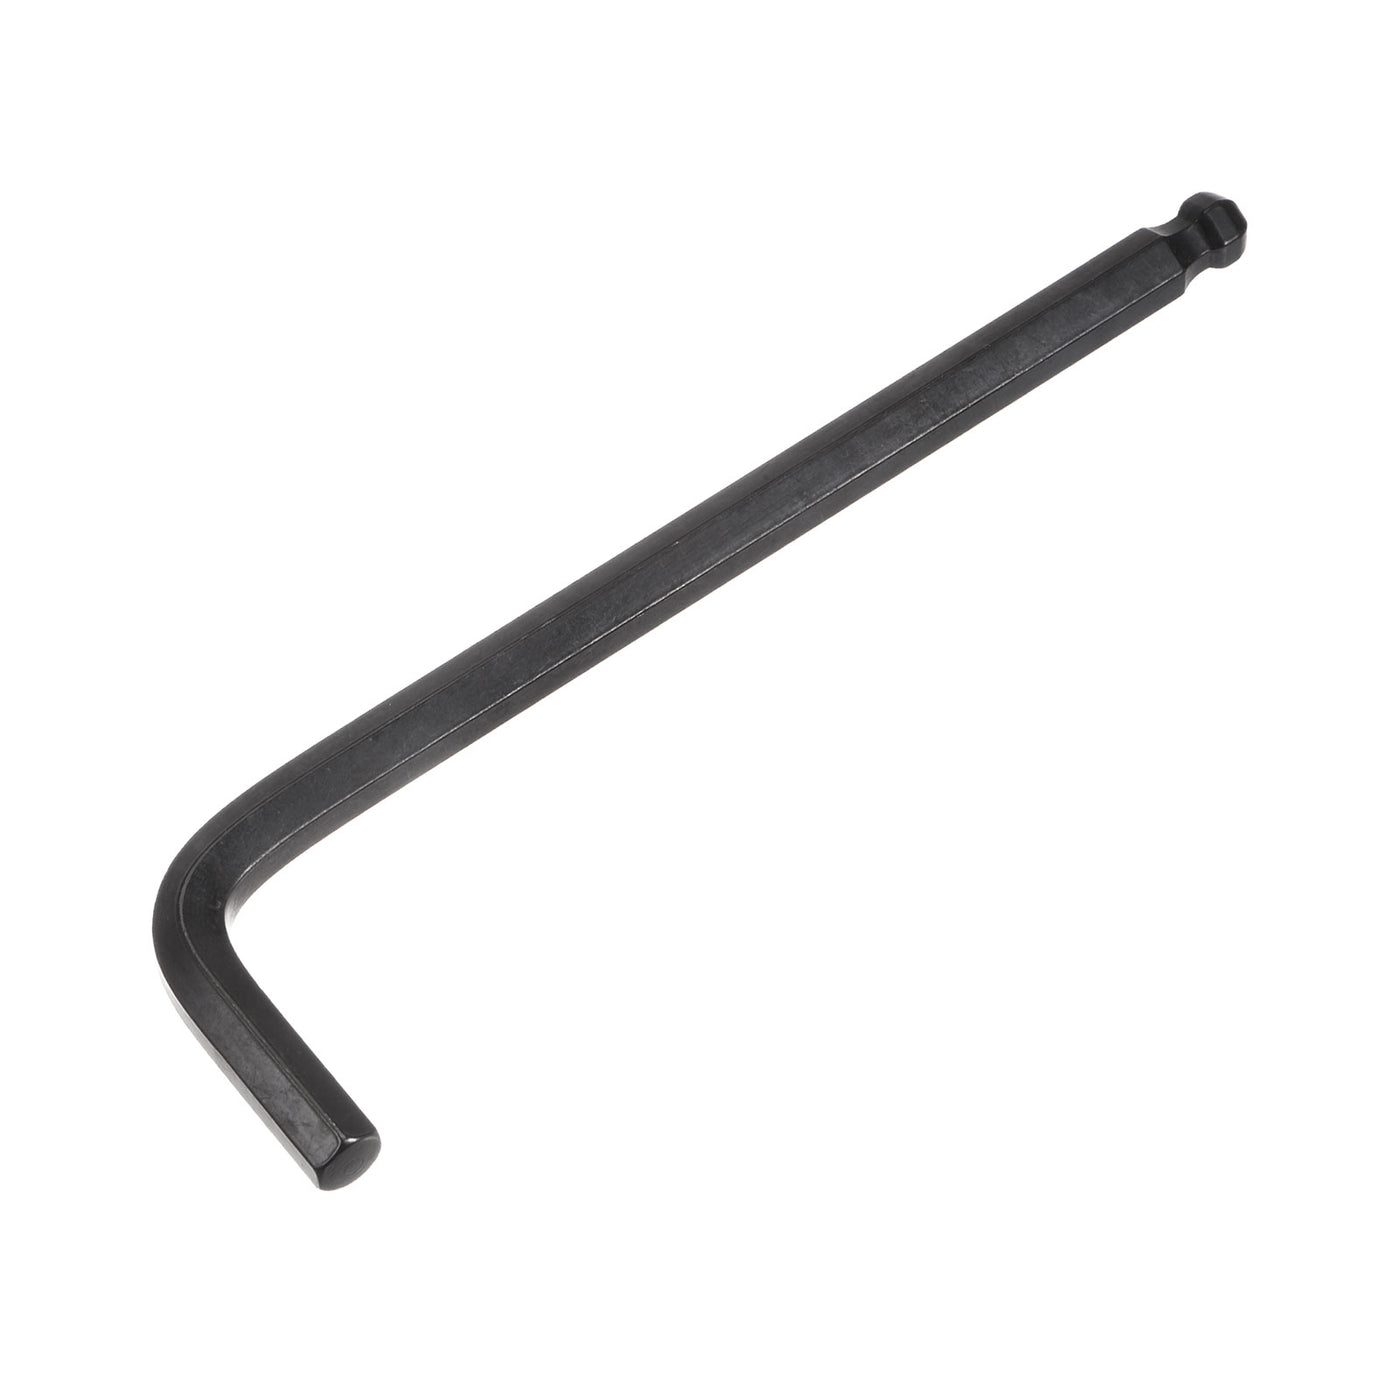 uxcell Uxcell 3/8" Ball End Hex Key Wrench, L Shaped Long Arm CR-V Repairing Tool, Black